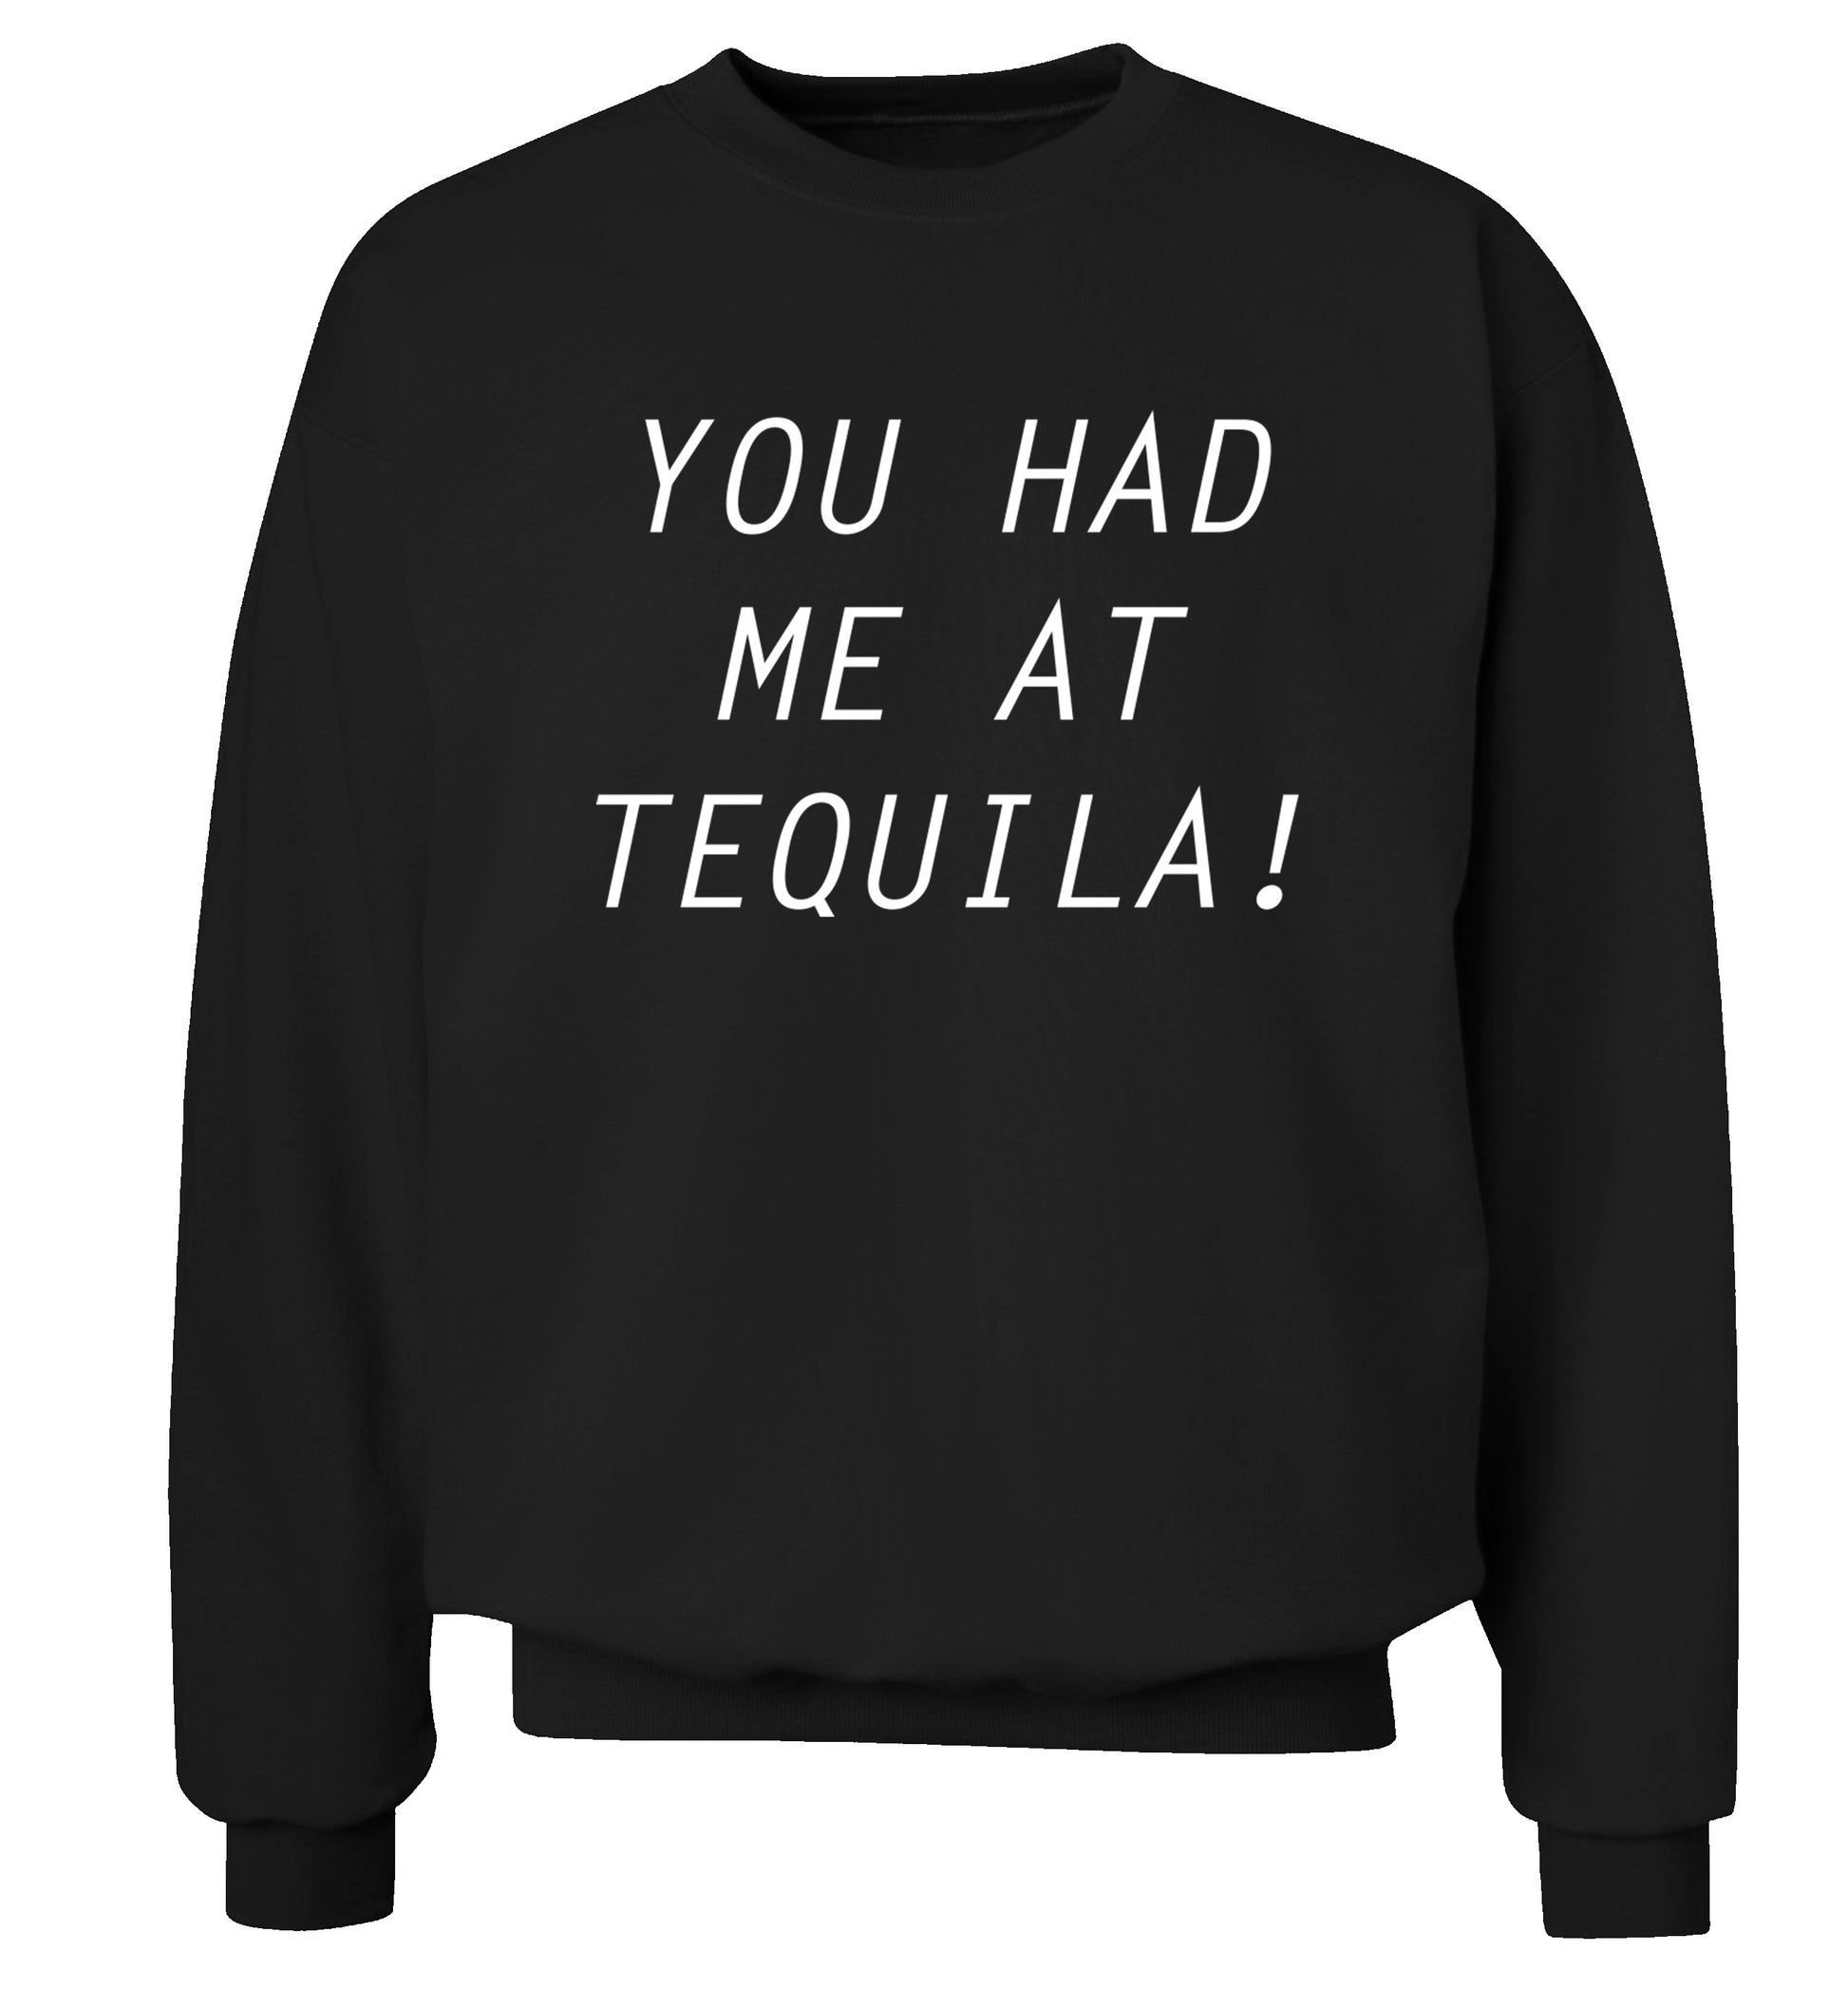 You had me at tequila Adult's unisex black Sweater 2XL